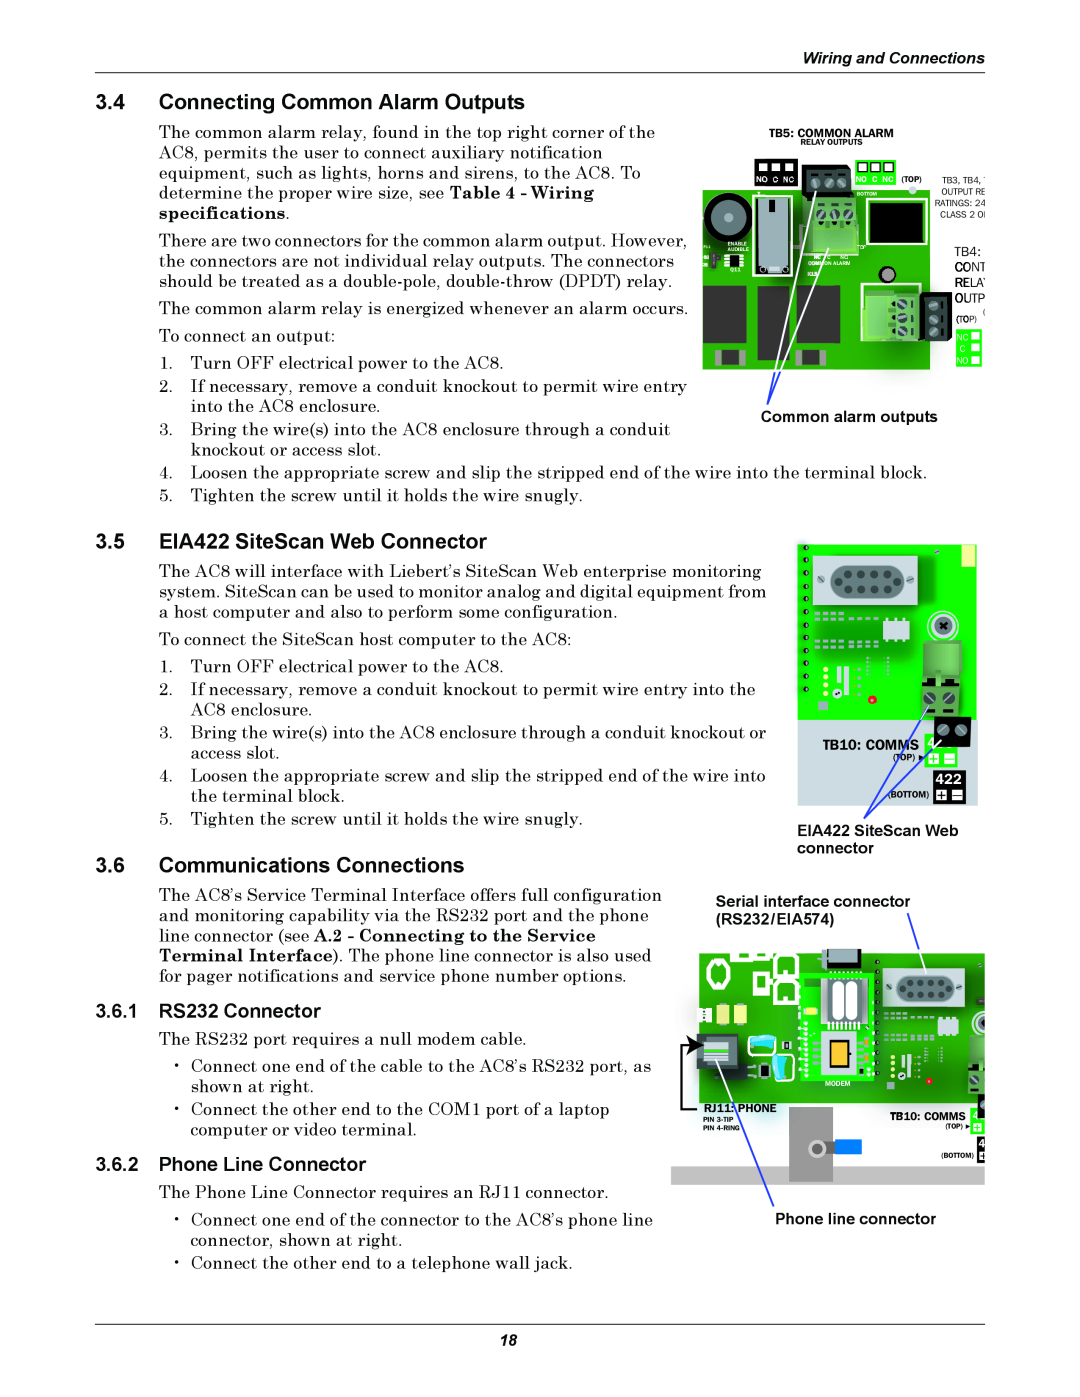 Emerson AC8 user manual 3.4Connecting Common Alarm Outputs, 3.5EIA422 SiteScan Web Connector, 3.6Communications Connections 